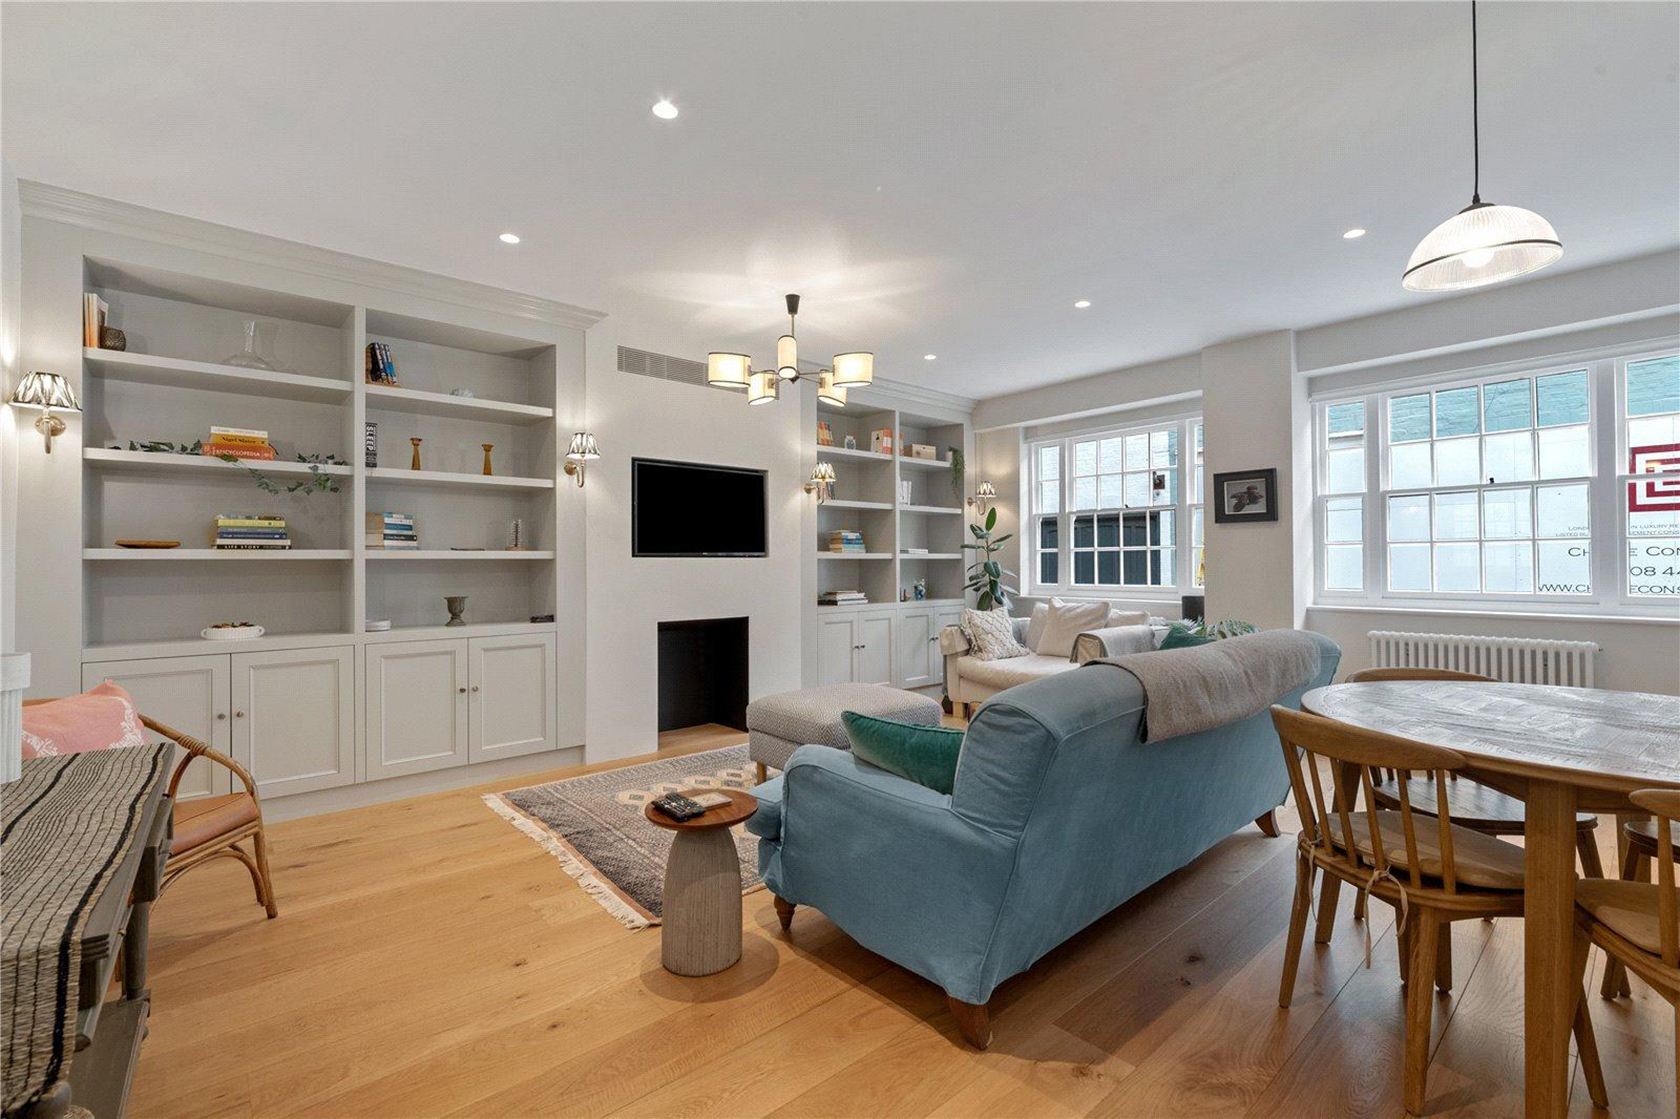 Notting Hill mews home for sale